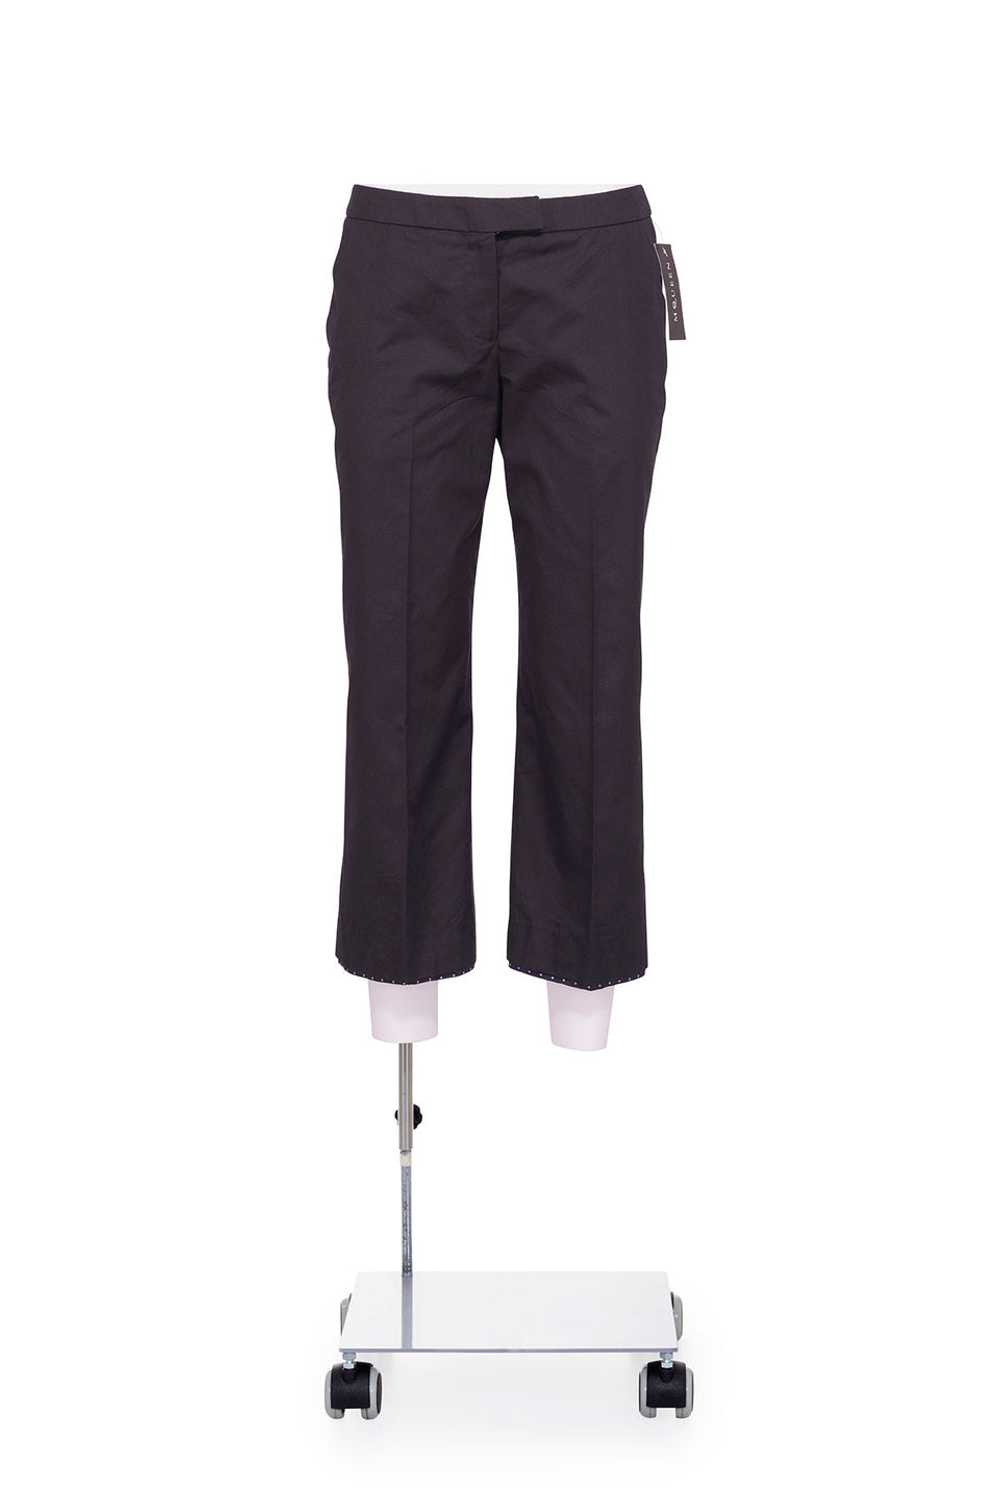 ALEXANDER MCQUEEN LOW RISE CROPPED TROUSERS - image 2